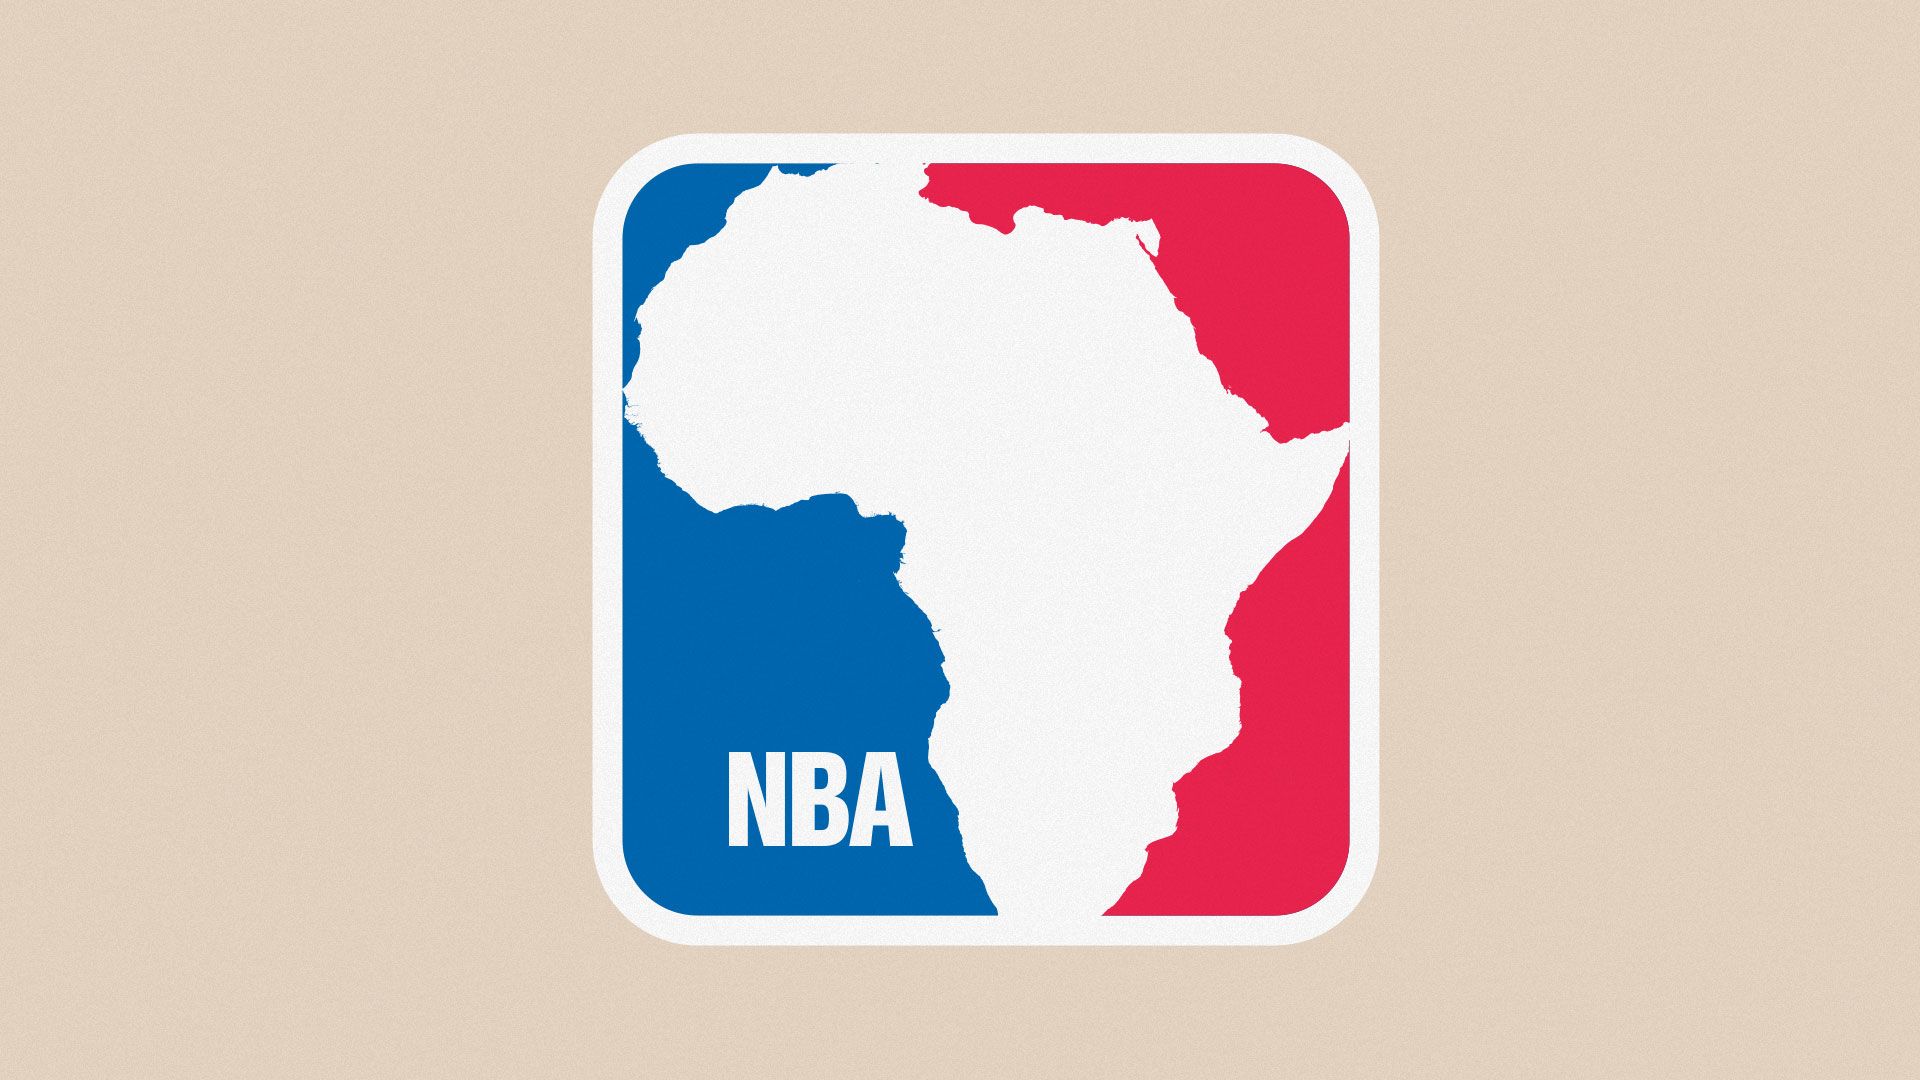 Illustration of NBA logo with person replaced with outline of Africa.